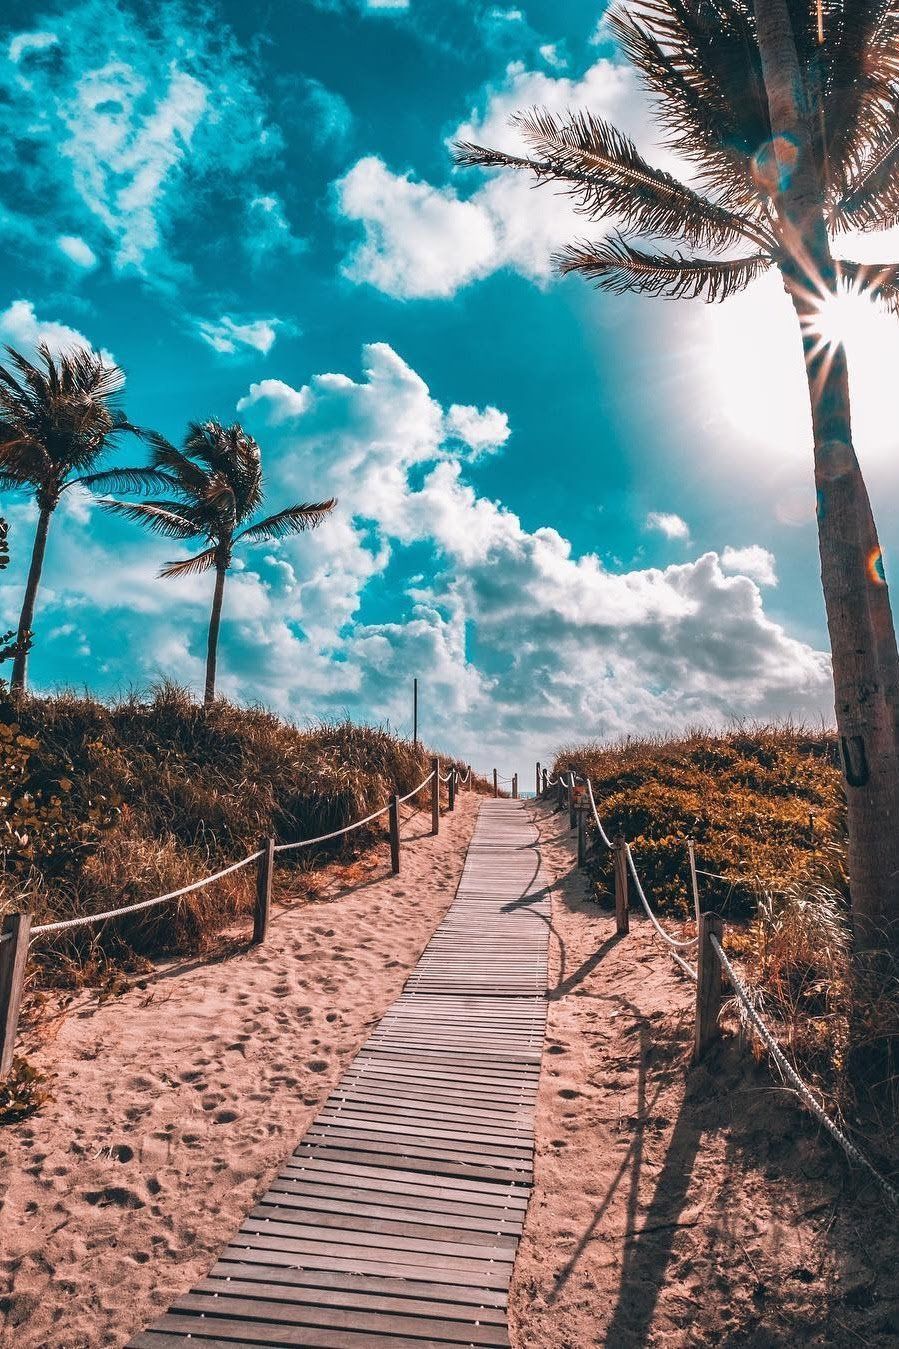 A wooden walkway leads to the beach - Miami, Florida